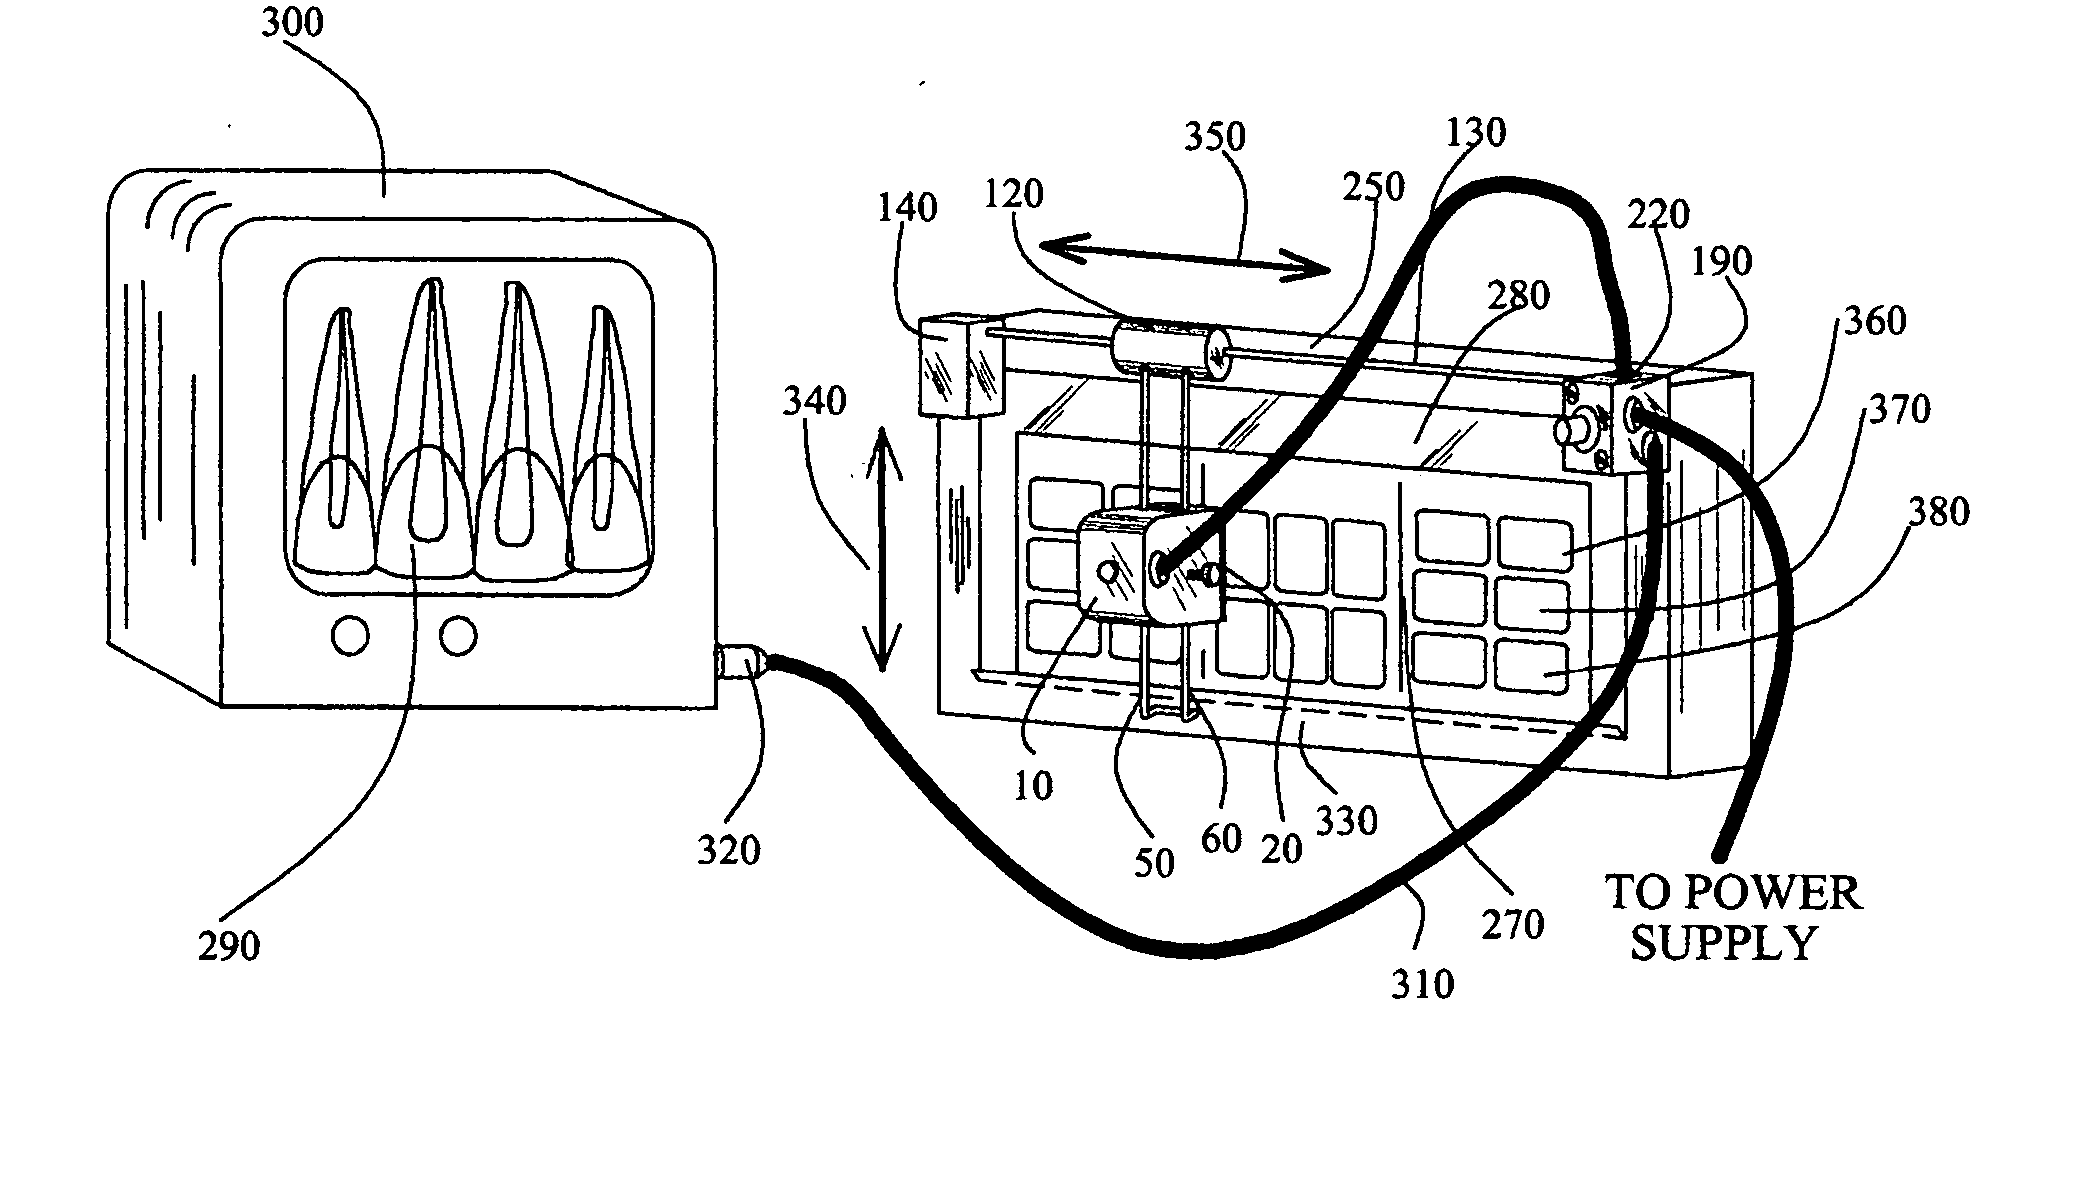 Apparatus for converting a standard dental x-ray viewbox into an analog or digital viewing system